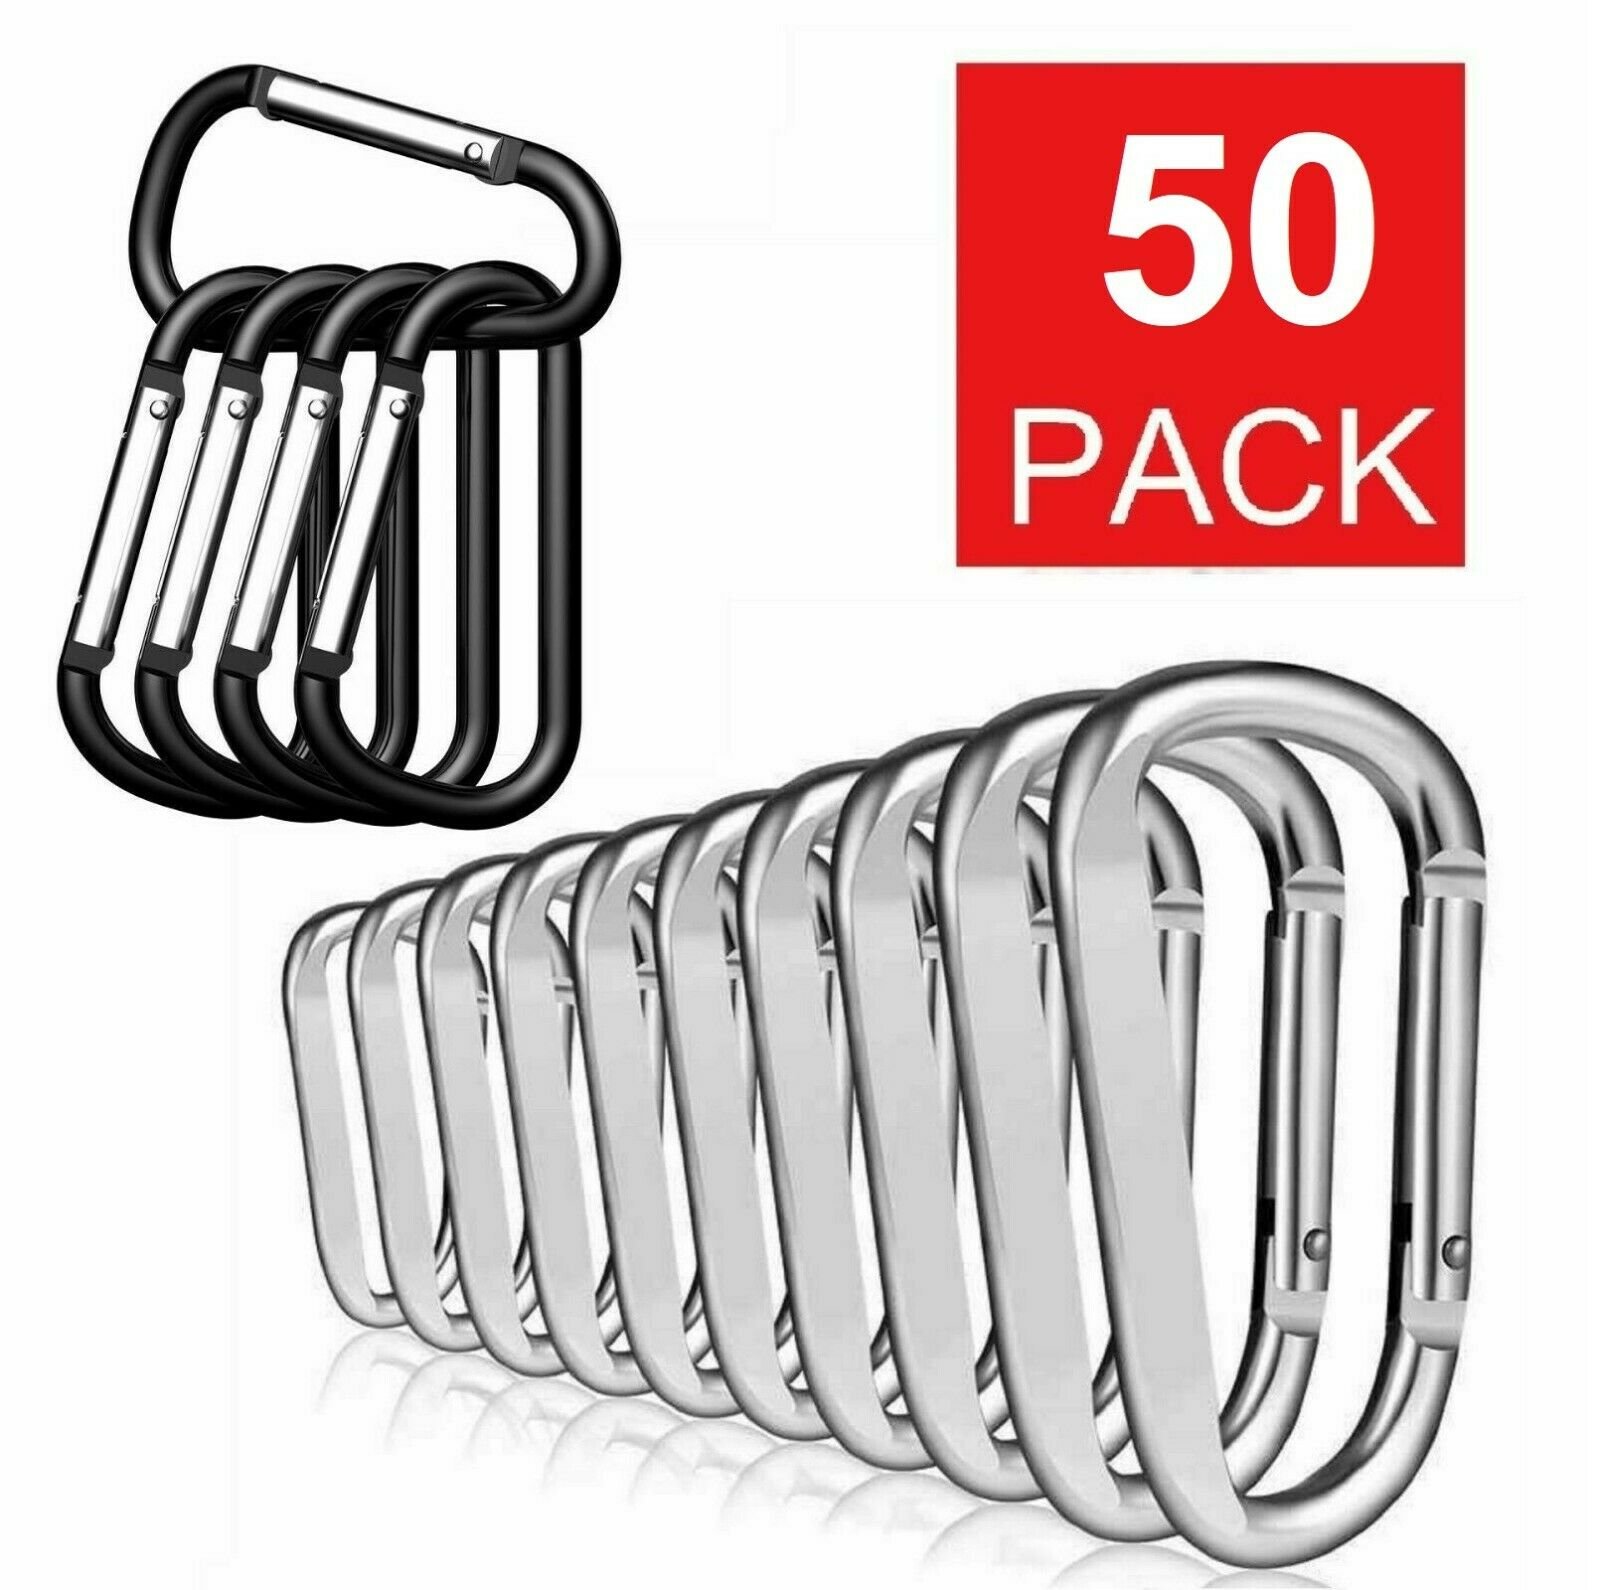 SHAPED CARABINER SPRING BELT CLIP WITH RING 1-7/8" ALUMINUM 6 COLORS LOT 50 D 